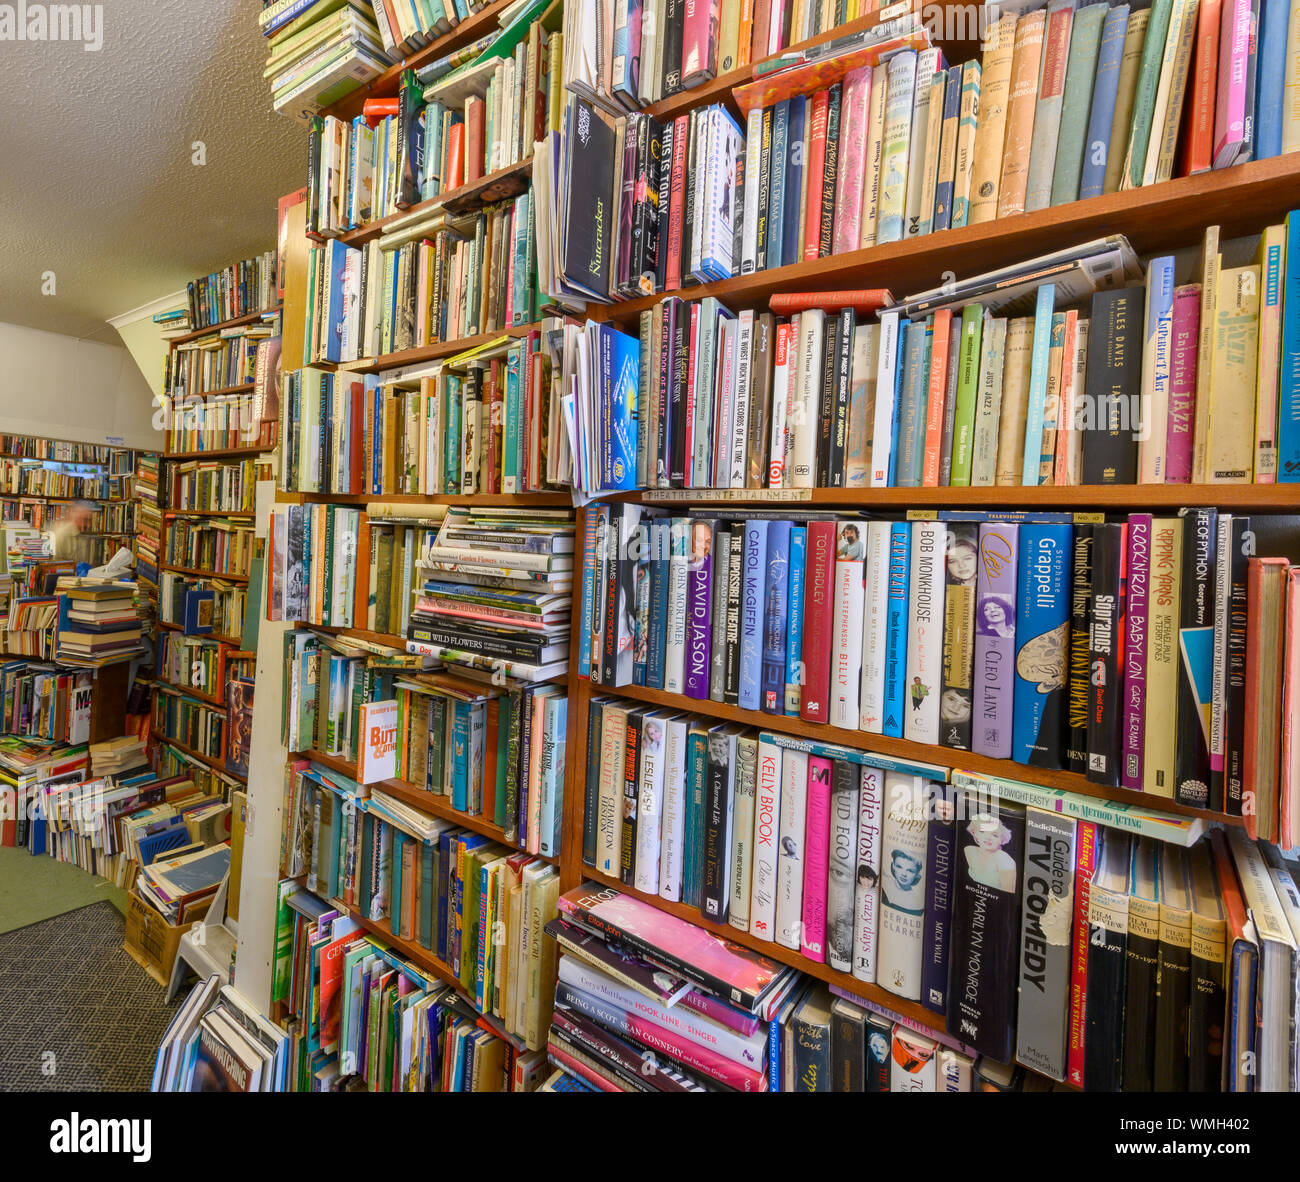 Interior of a very crowded second-hand bookshop. Stock Photo